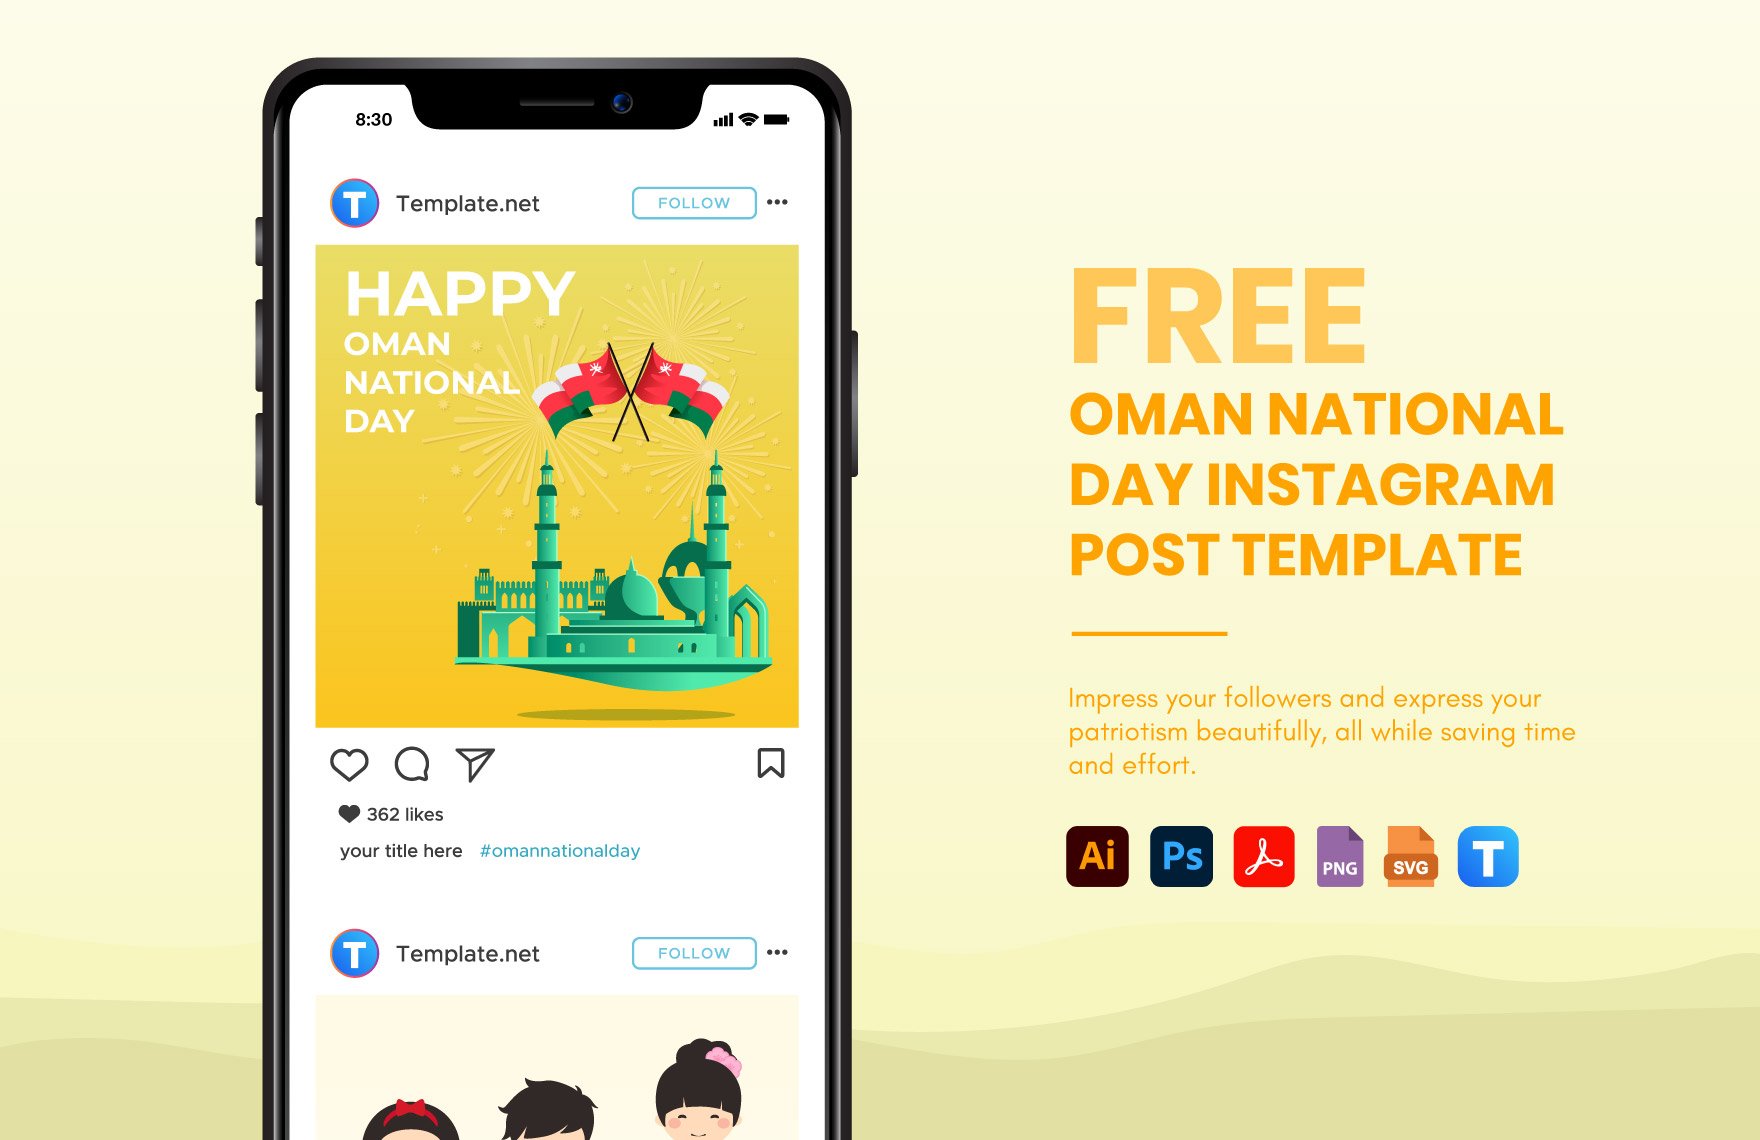 Free Oman National Day Instagram Post Template in PDF, Illustrator, PSD, SVG, PNG